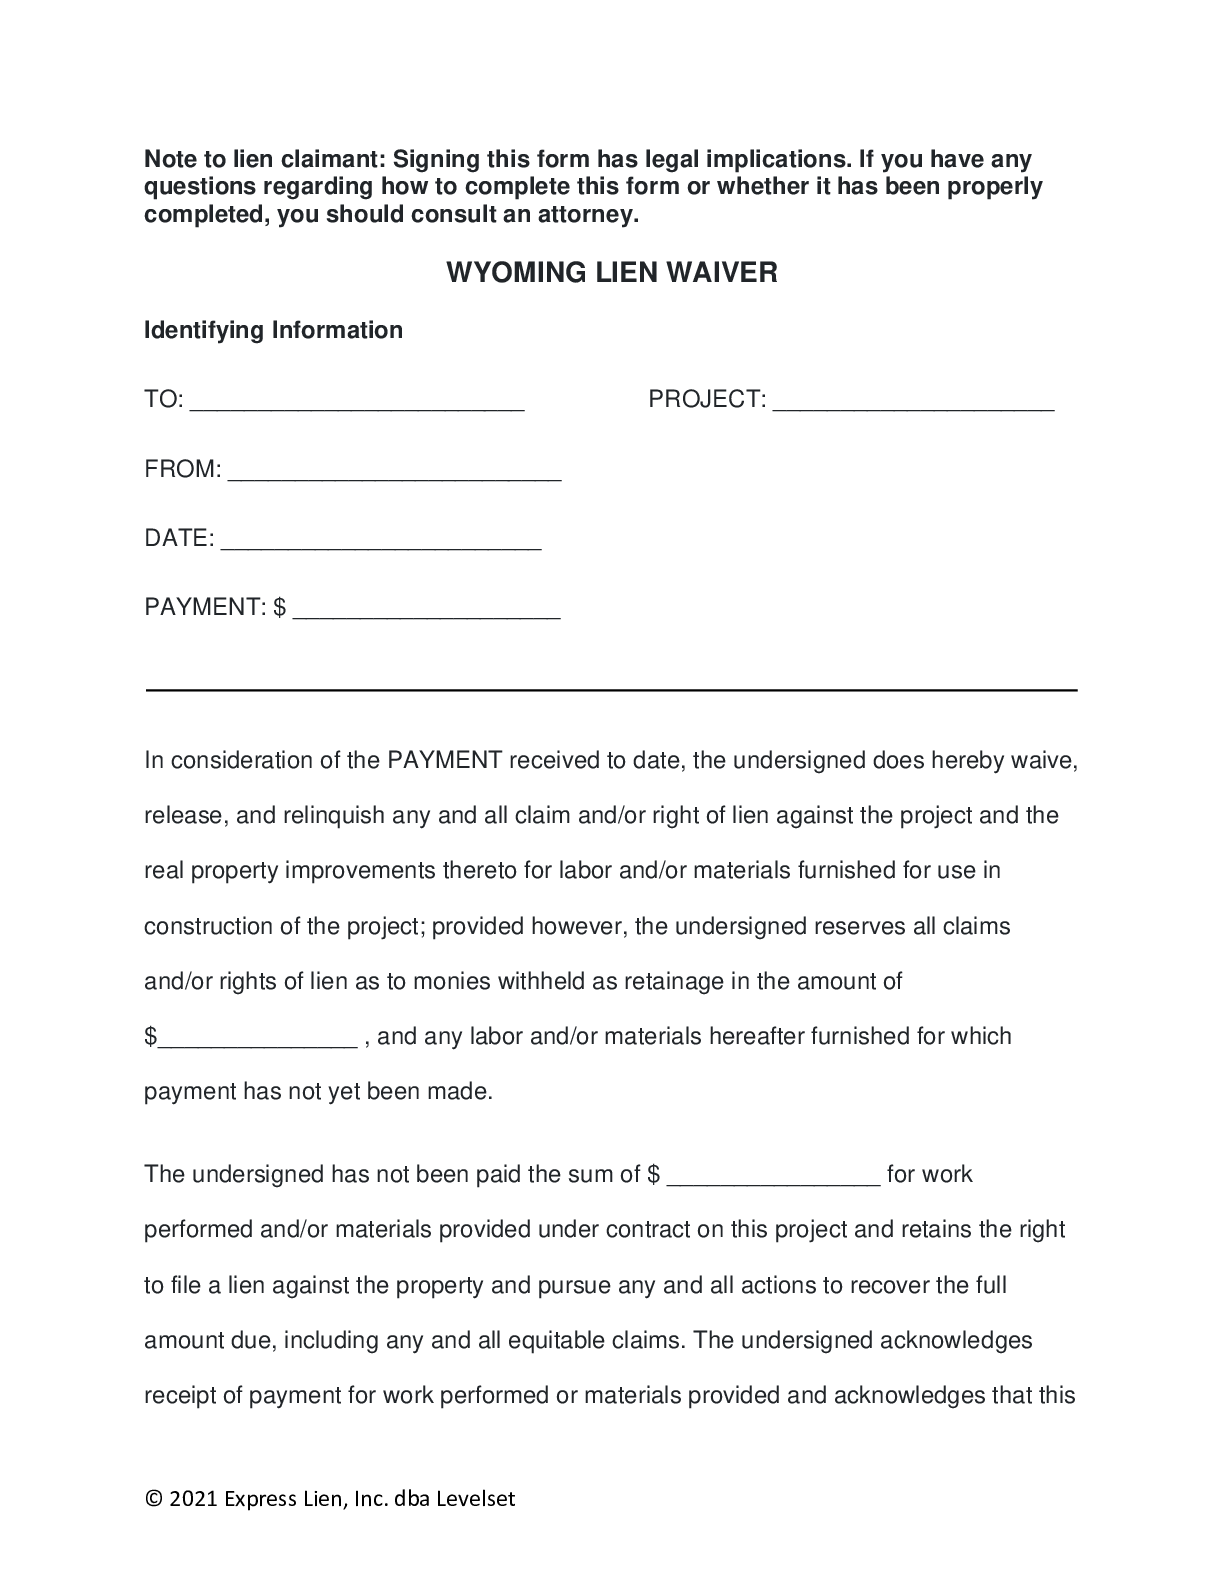 Wyoming Unconditional Lien Waiver Form - free from